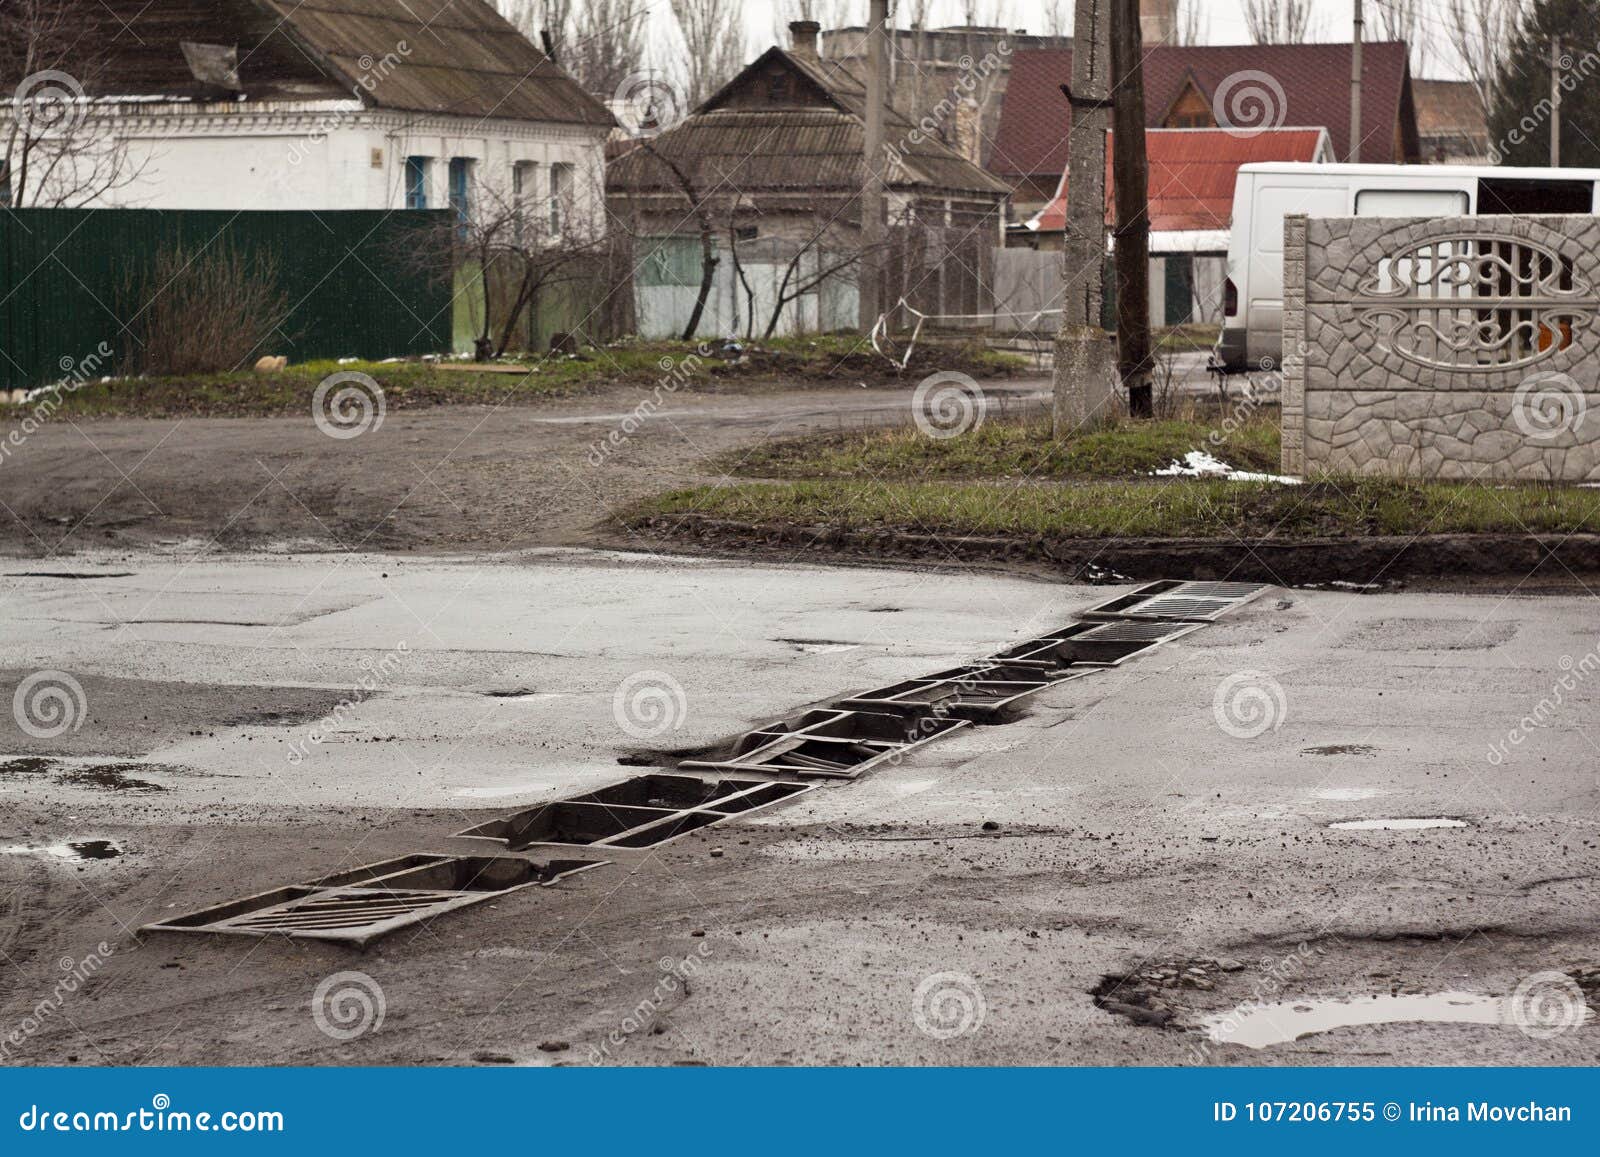 view of the roads in the city, the roads of eastern ukraine after the war, kramatorsk